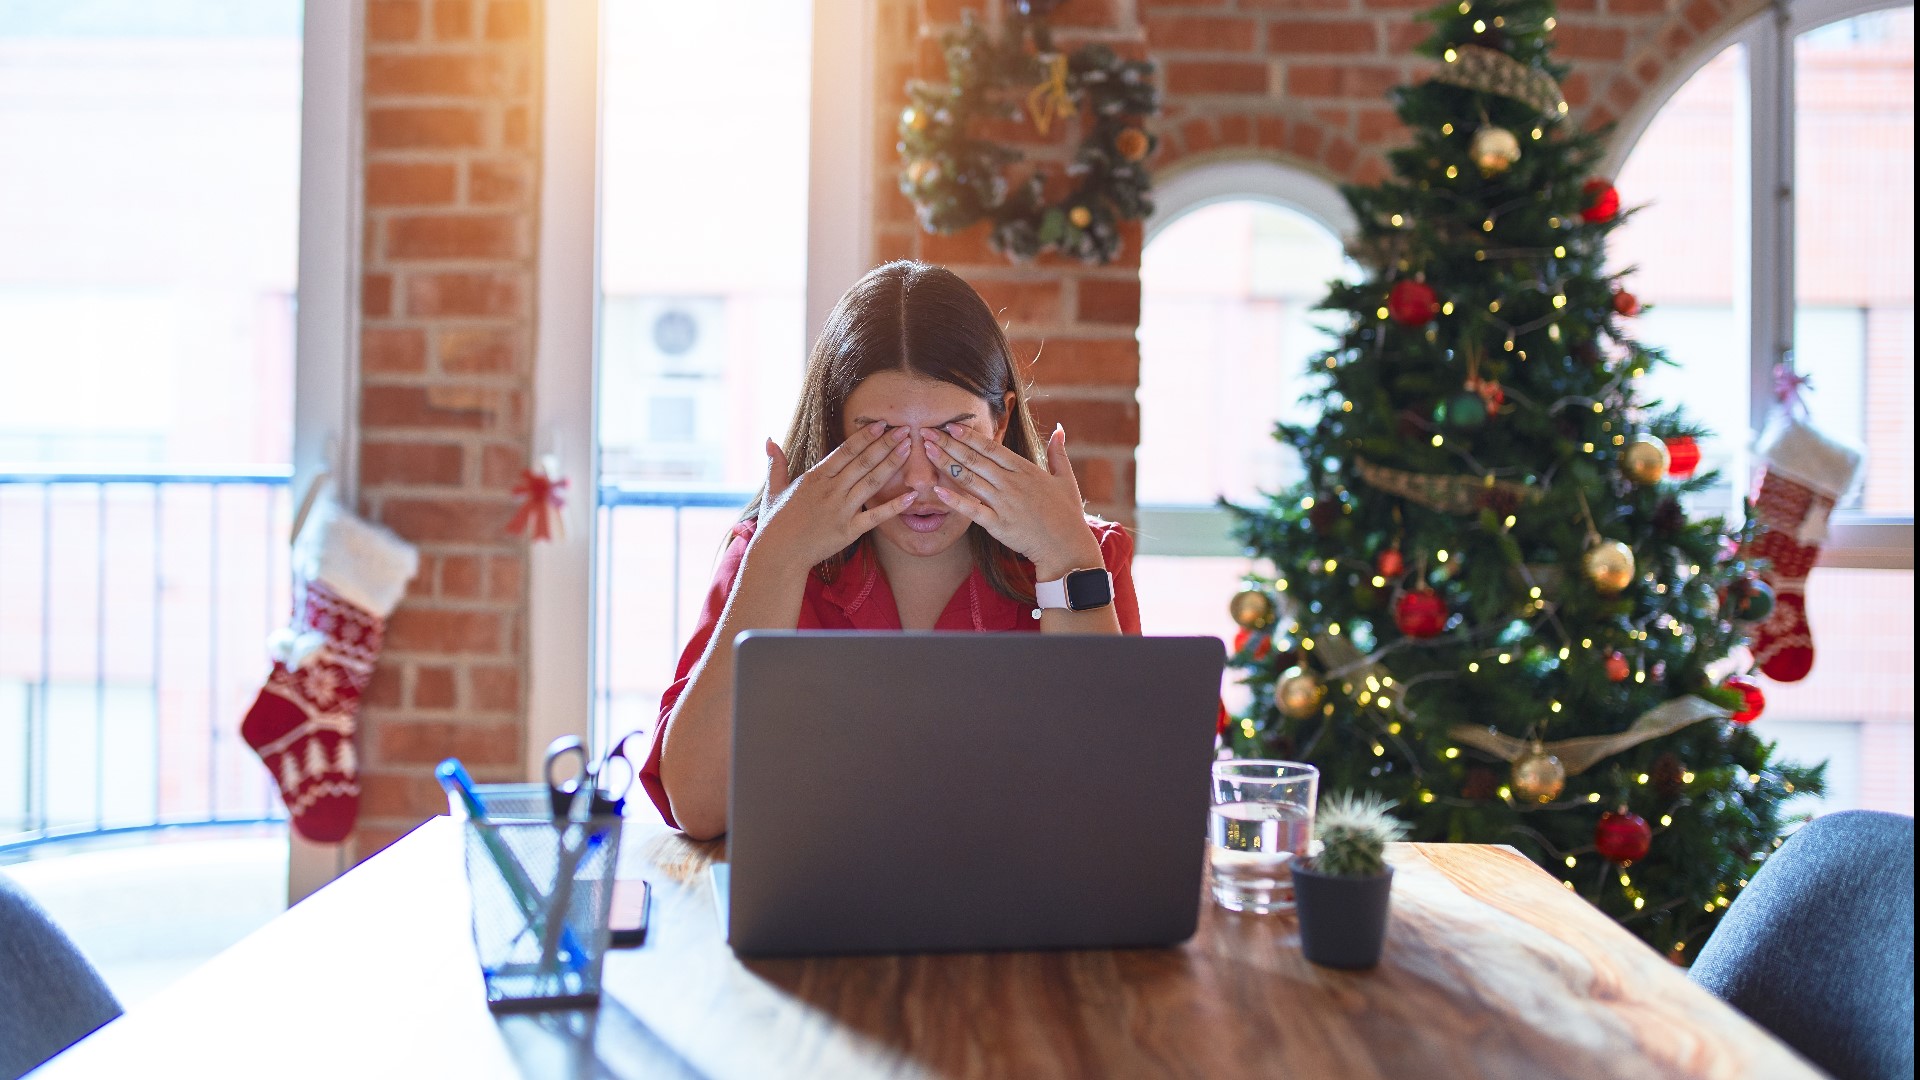 Cari Ladd with the Mental Health Center of Denver shares tips on what people can do to decrease stress around the holiday season.